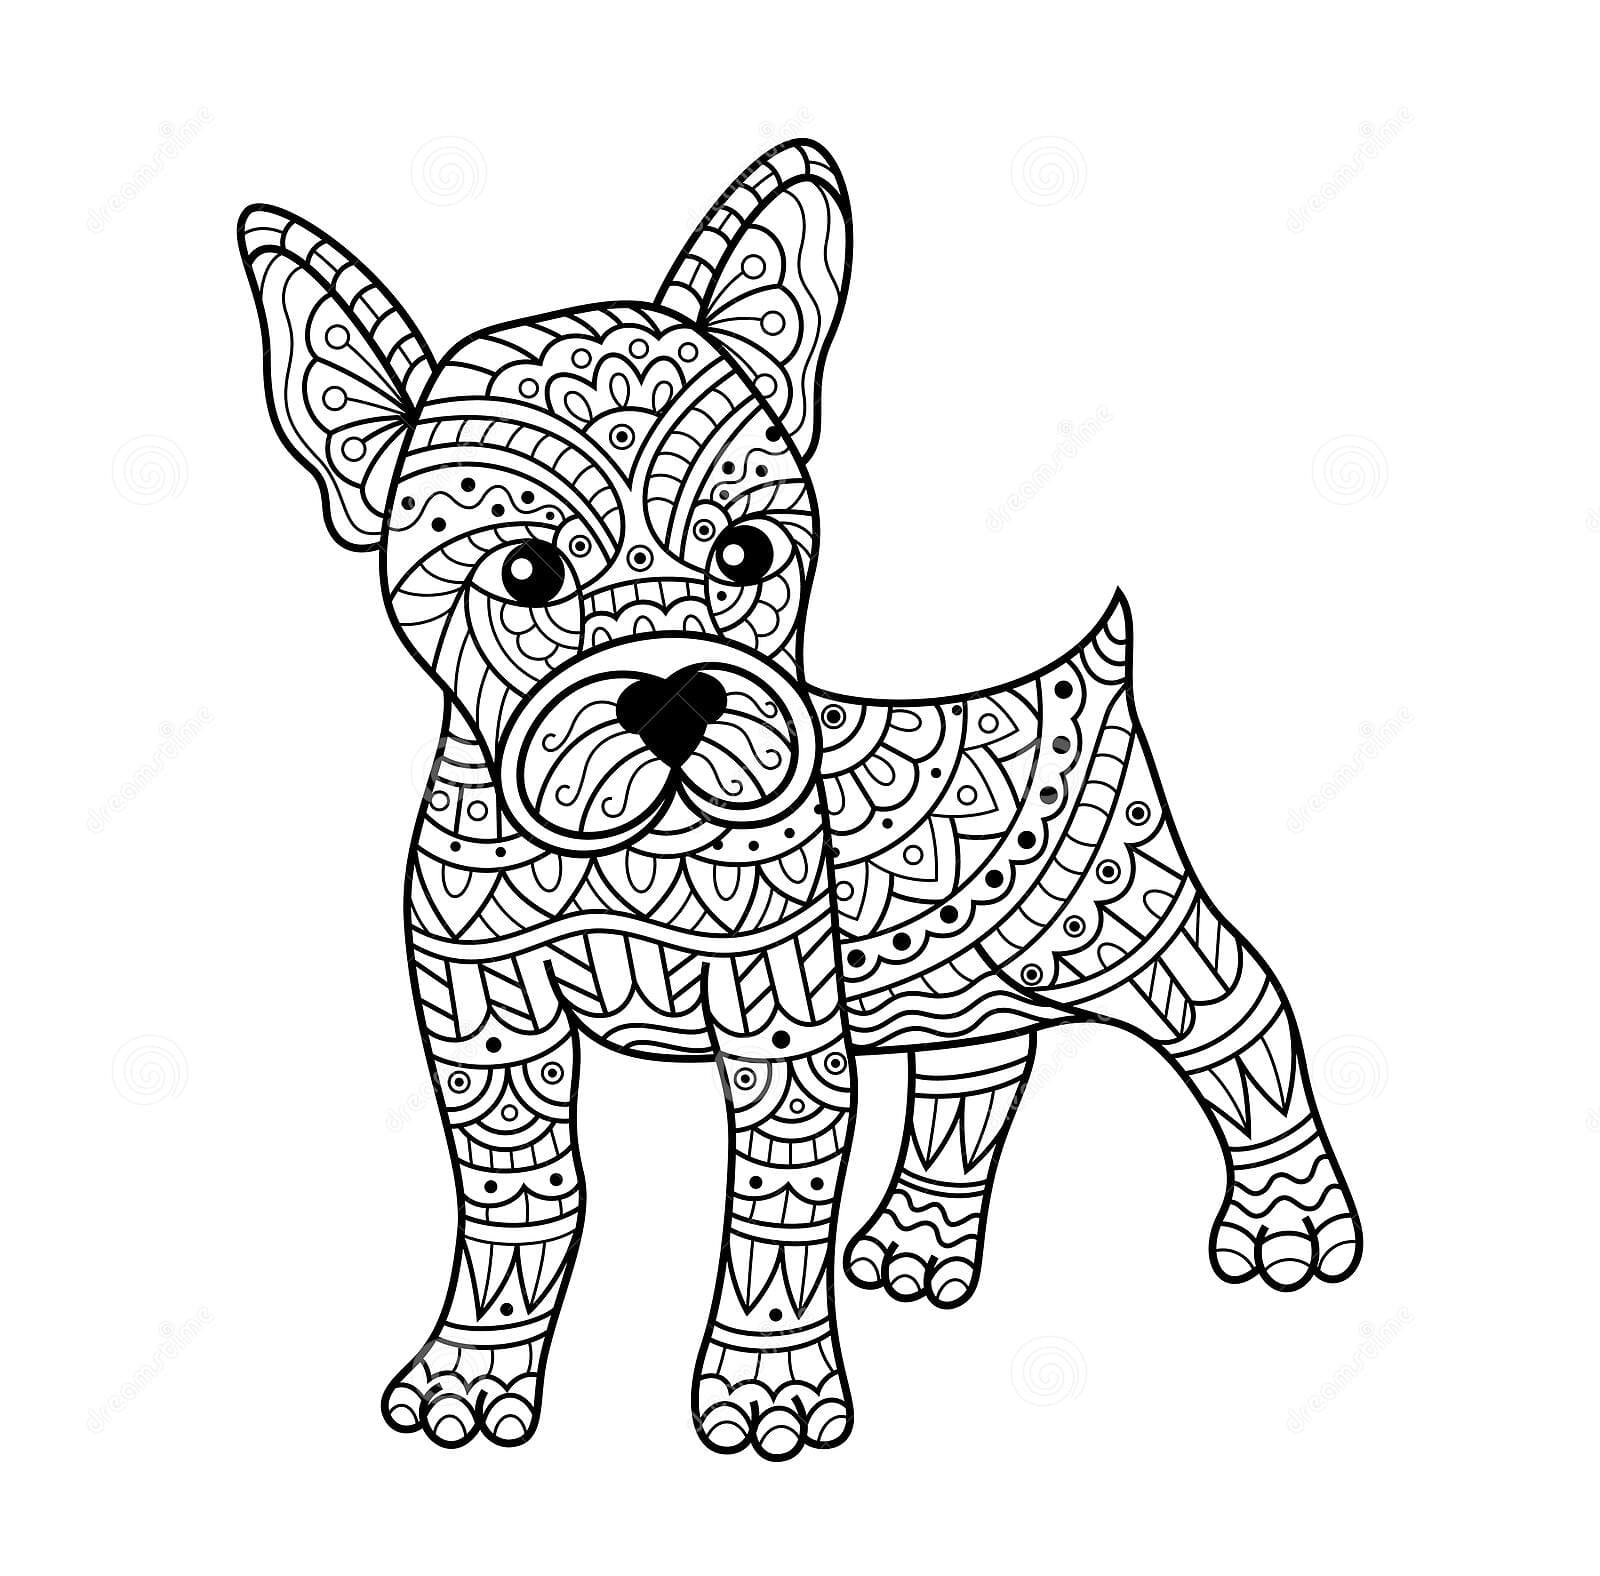 Hand Drawn Of Boston Terrier Dog In Zentangle Style Coloring Page